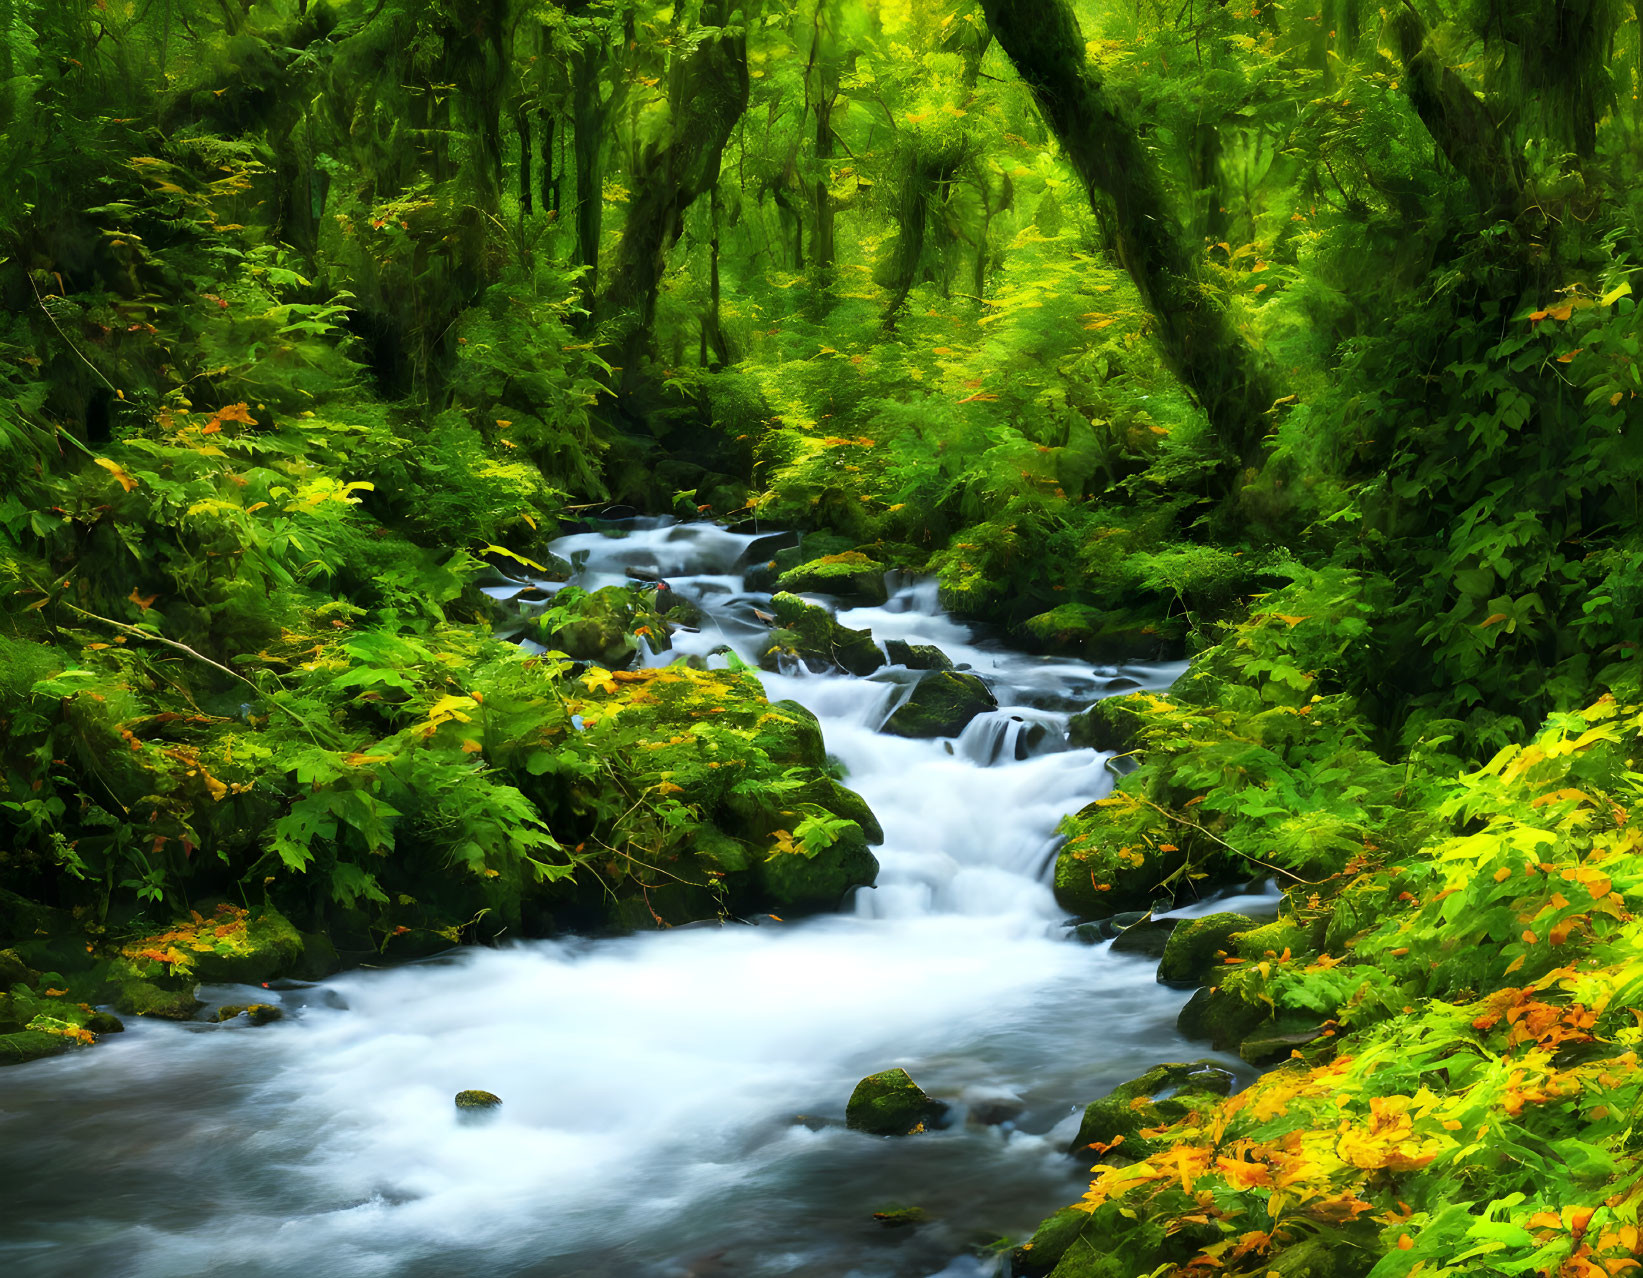 Tranquil stream flowing through lush green forest